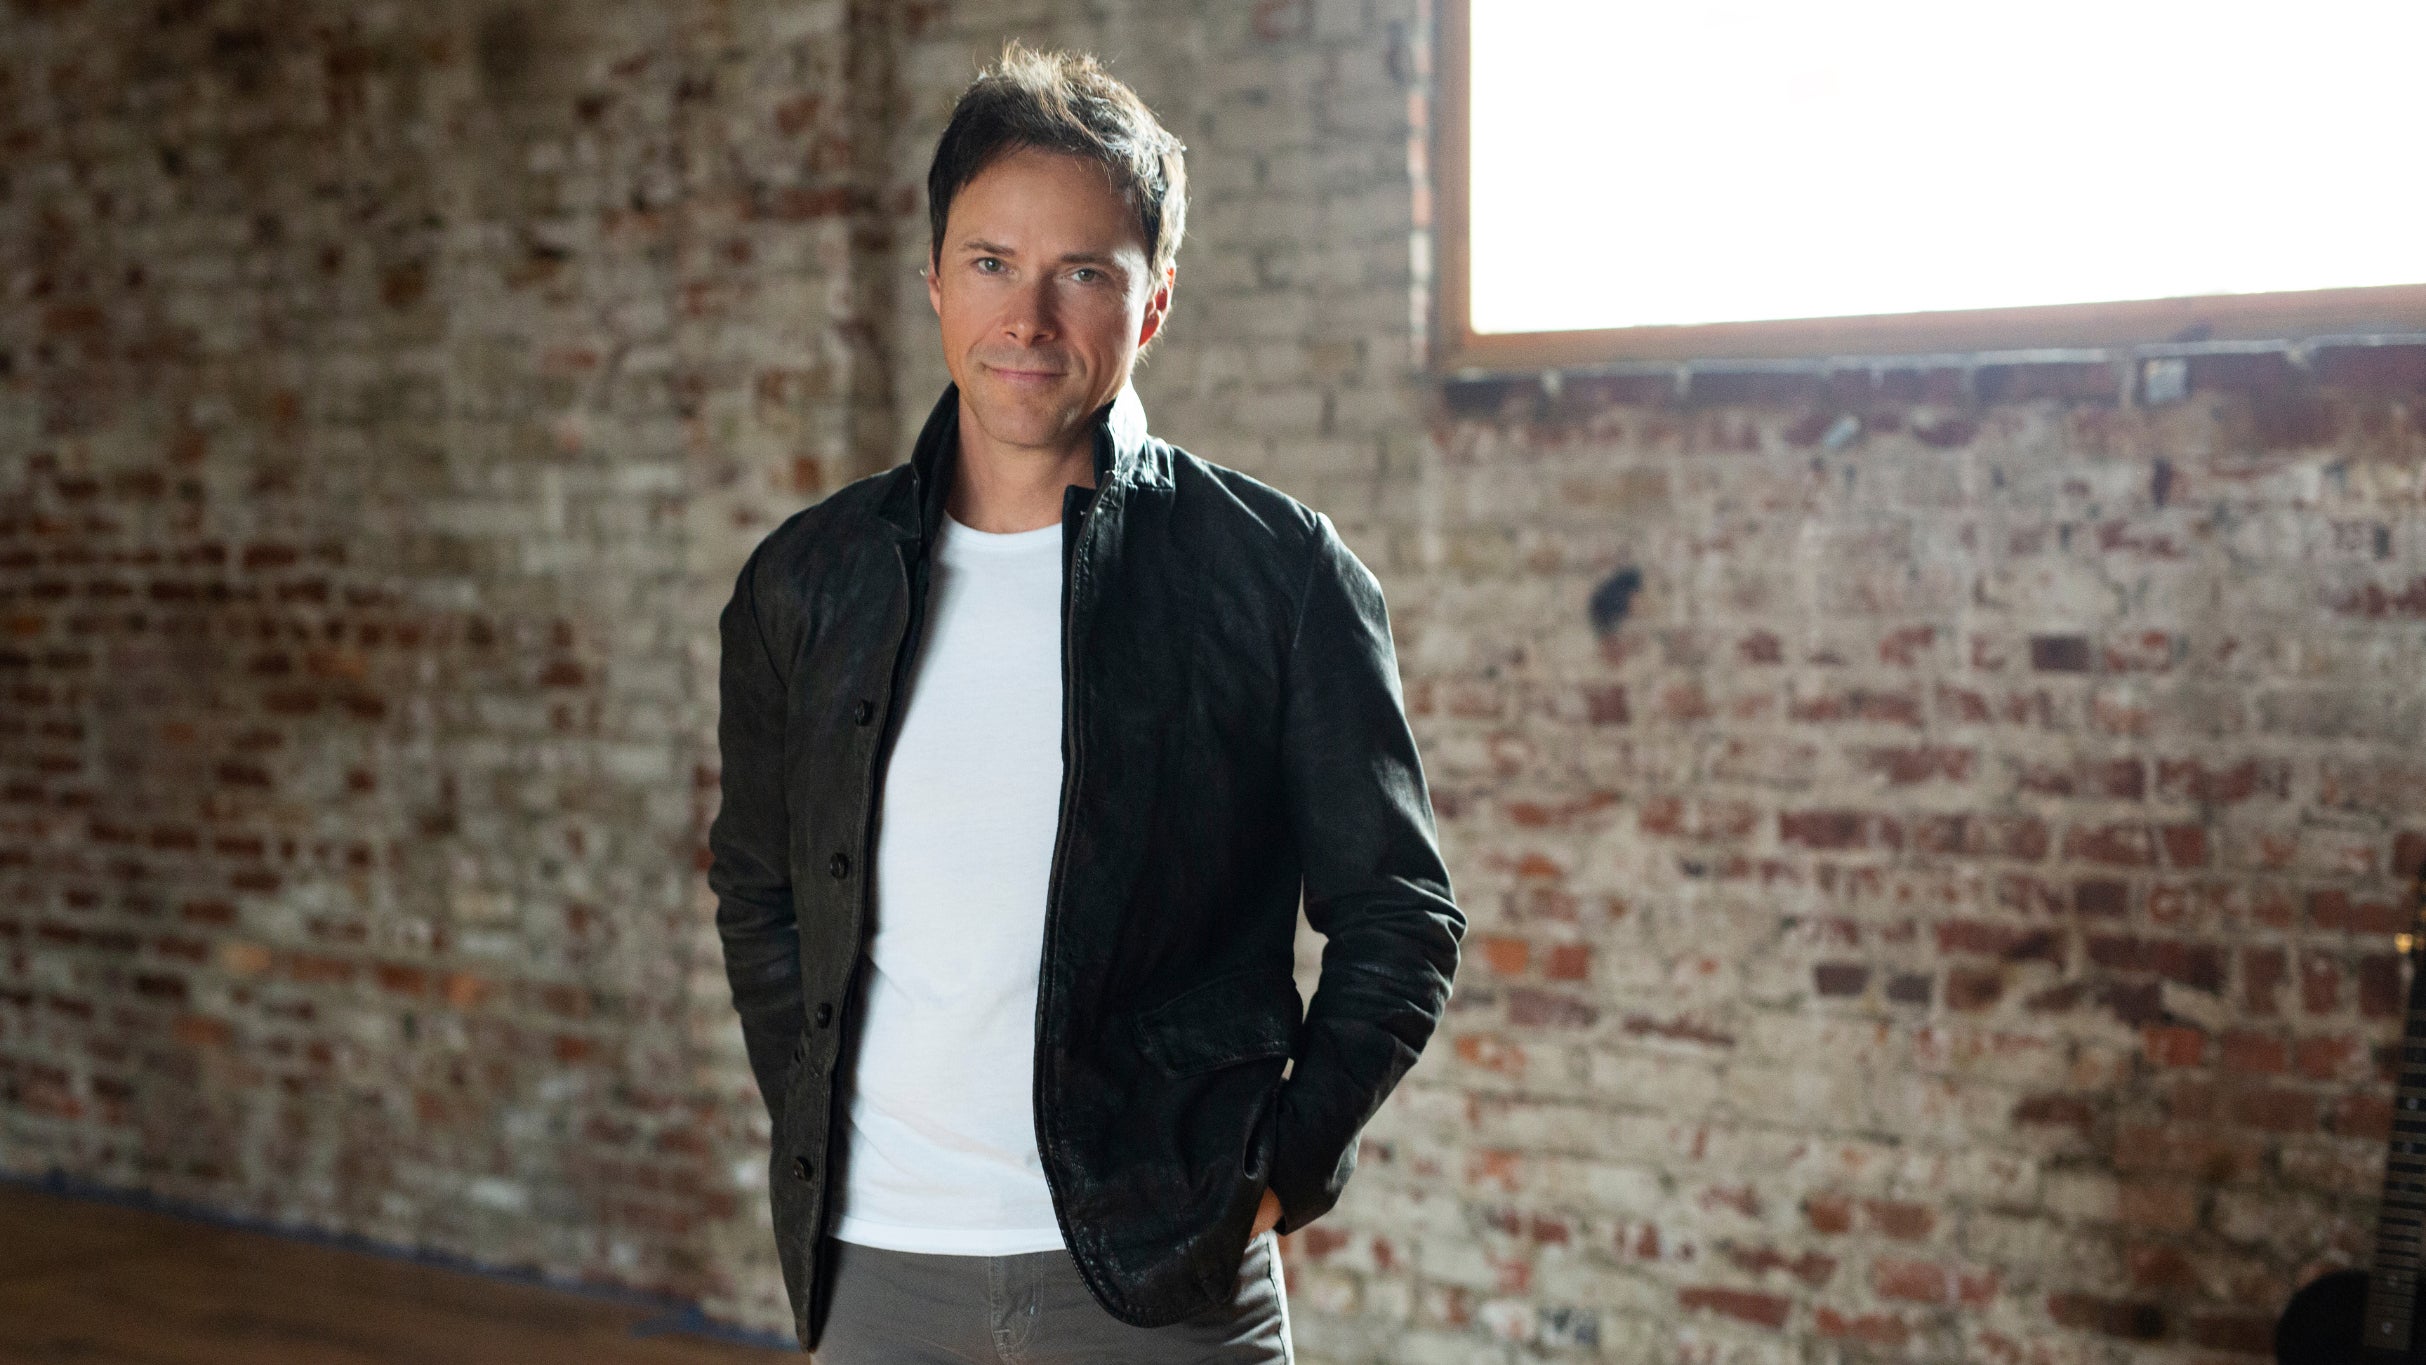 Bryan White and The Boys in Ottumwa promo photo for Exclusive presale offer code